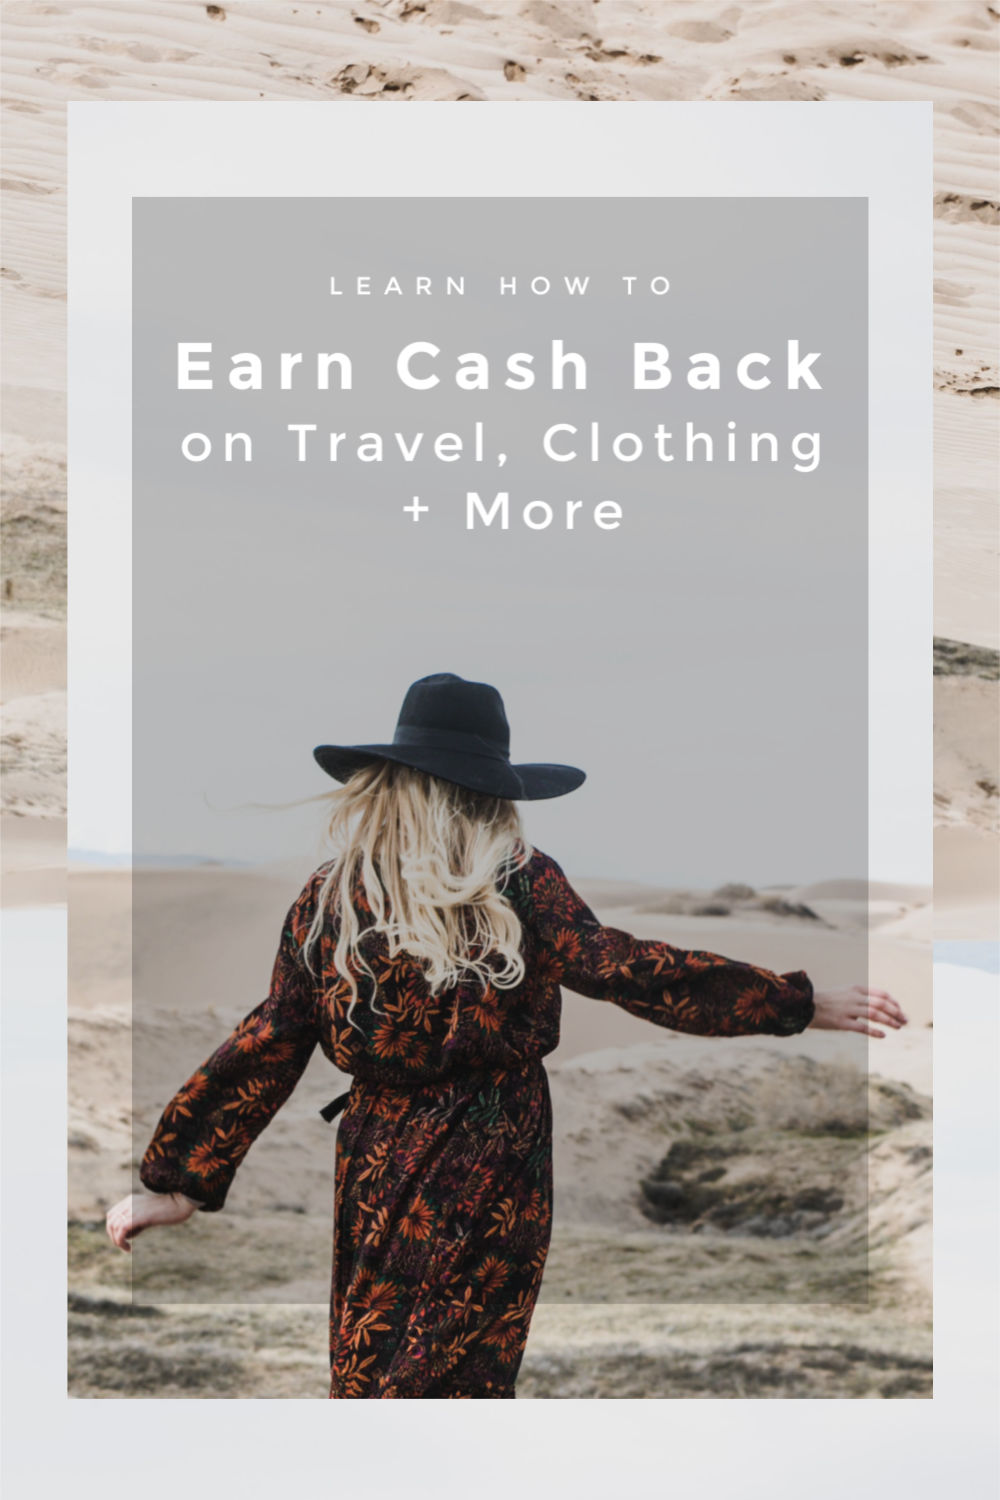 How to Earn Cash Back on Travel, Clothing + More